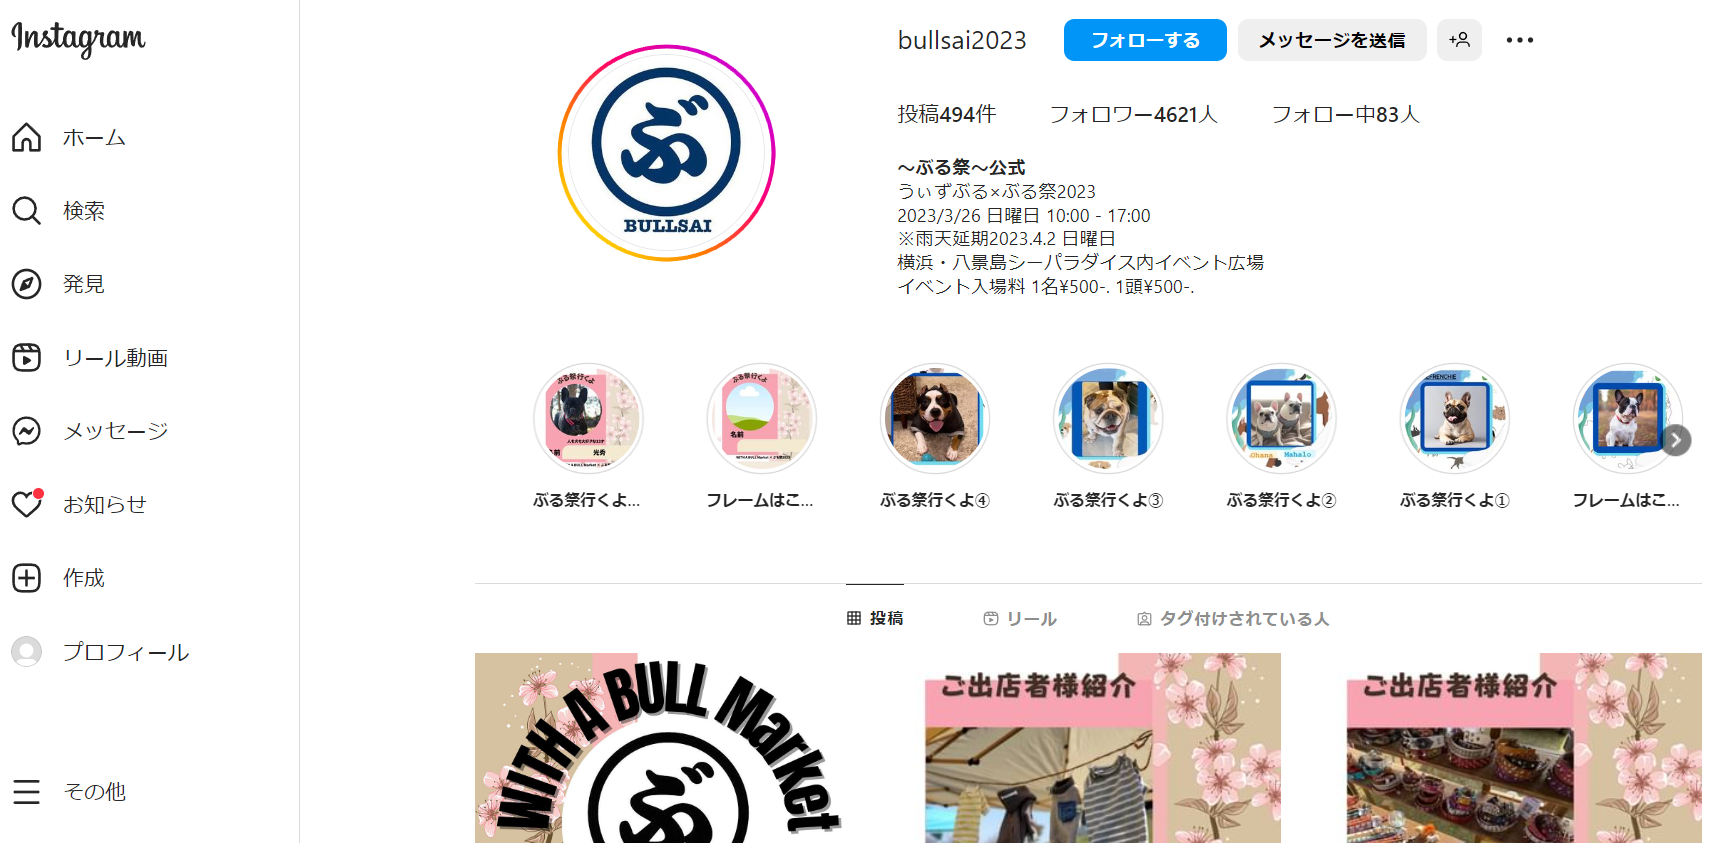 WITH A BULL Market×ぶる祭2023